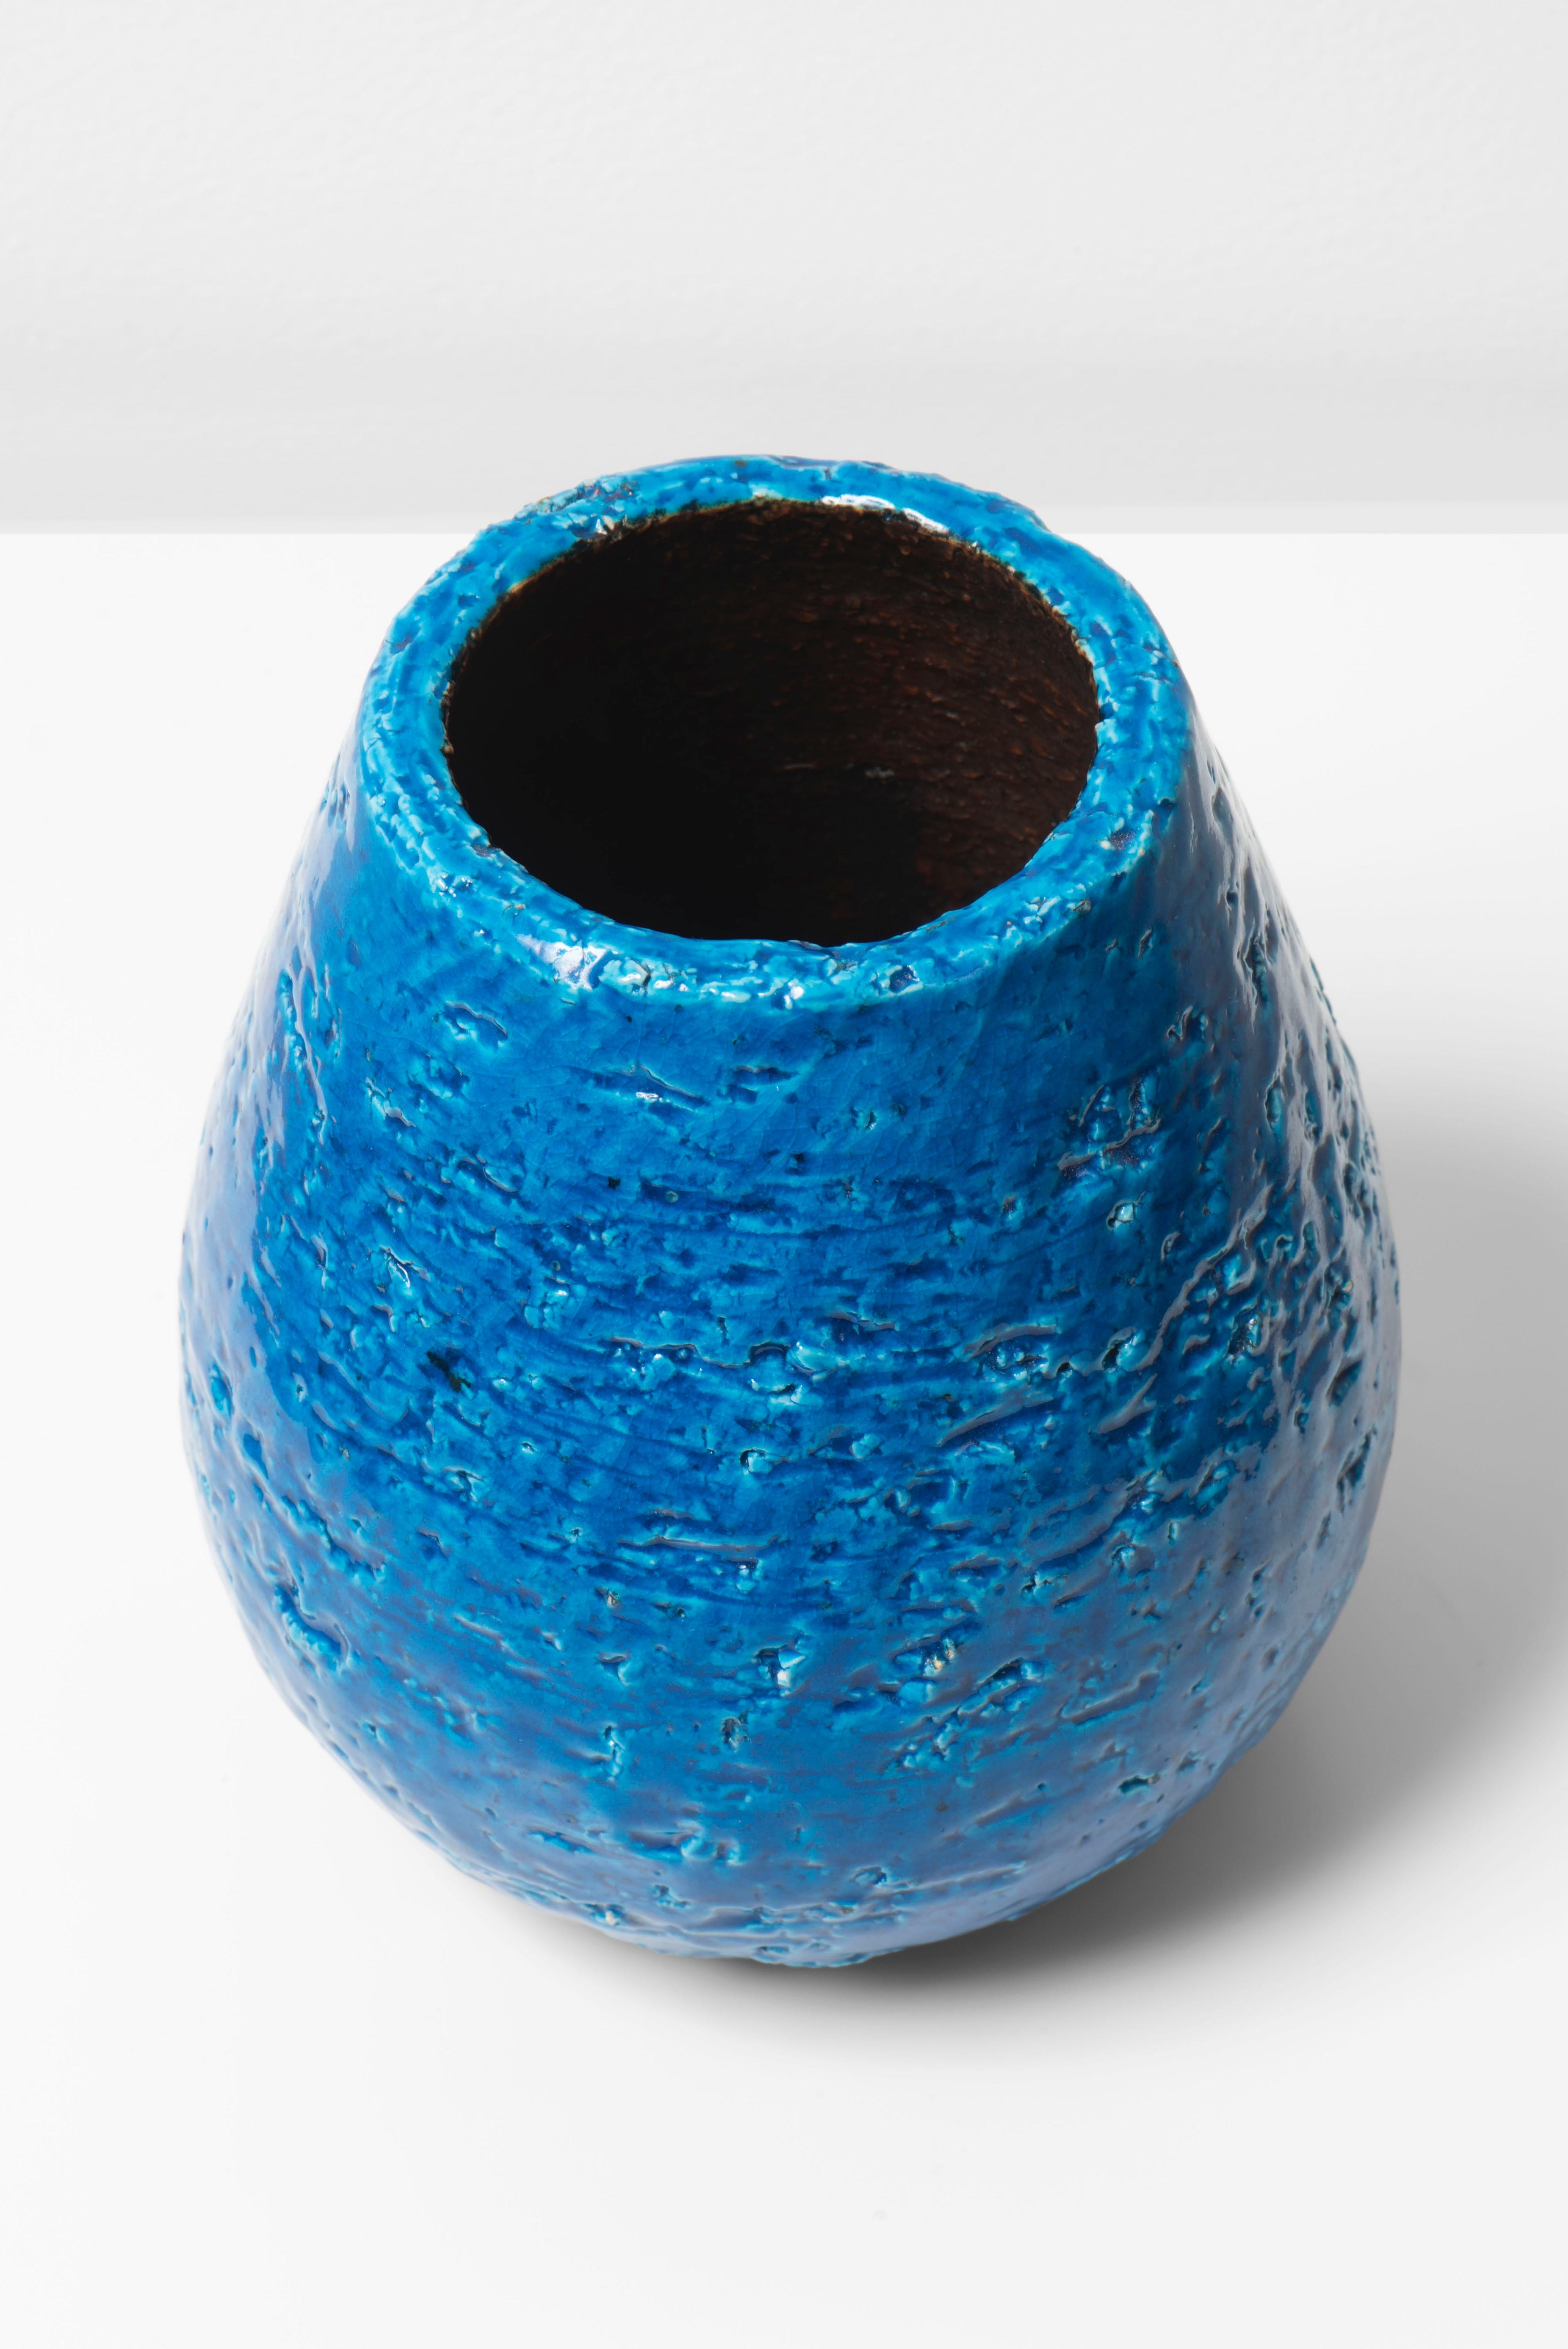 Creation by Gunnar Nylund (1914–1997) during his tenure as artistic director of Rörstrand from 1932 through the 1950s. The vase has a glossy white glaze over a rough rustic body creating a smooth touch but a brutal look to the piece. The Chamotte